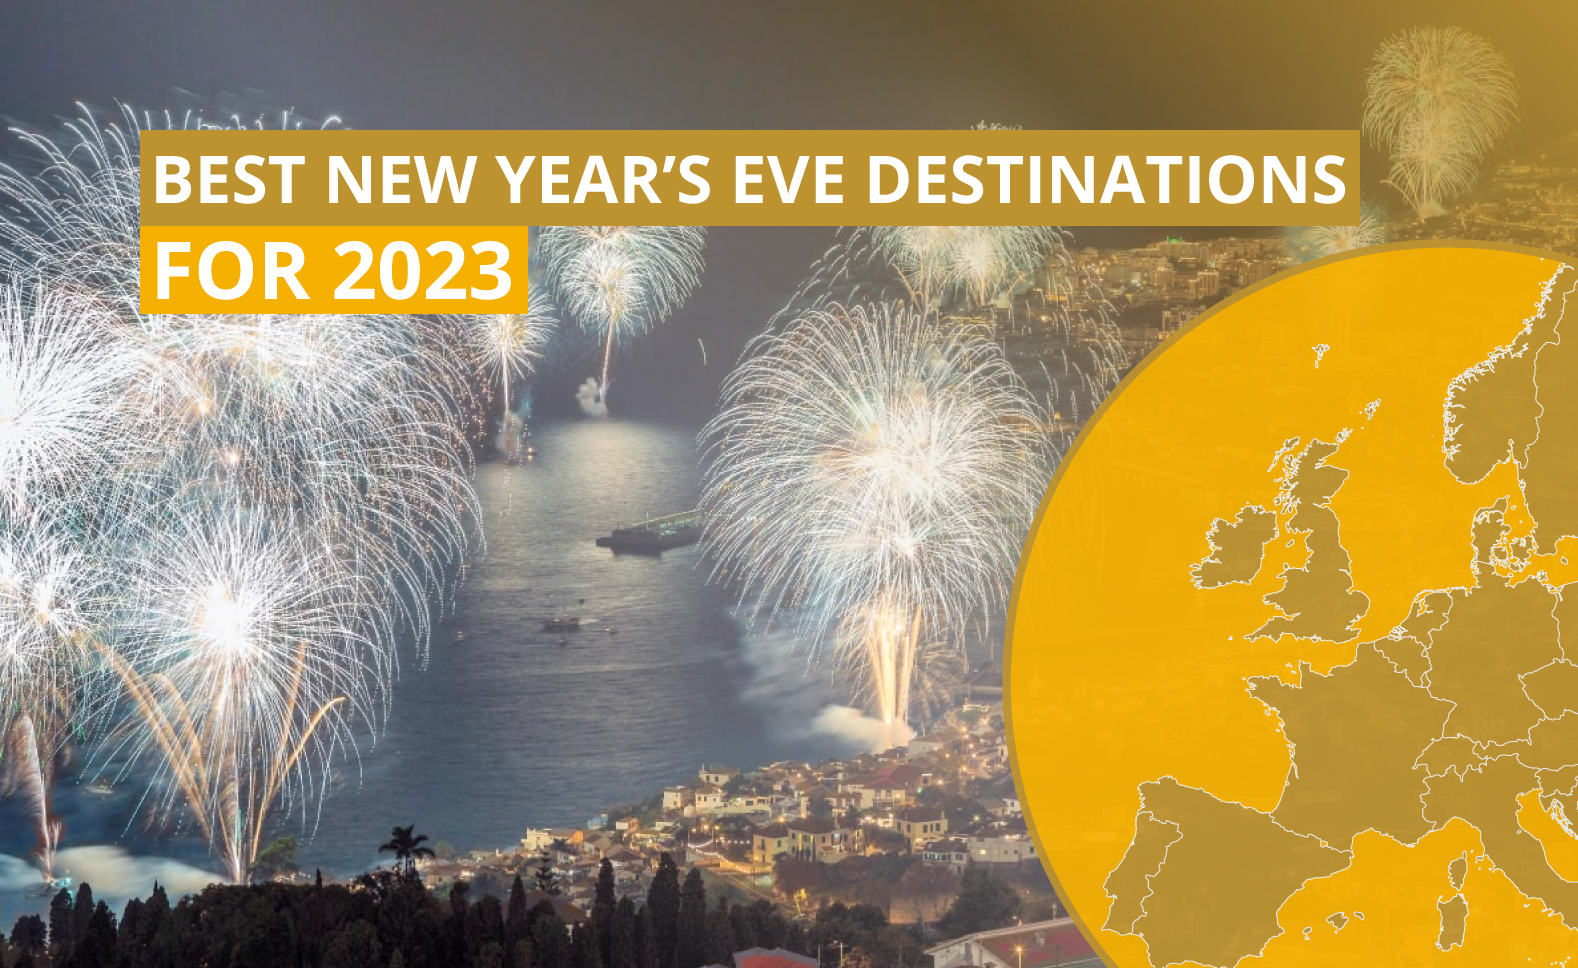 Best Destinations to Celebrate New Year's Eve in Europe - Europe's